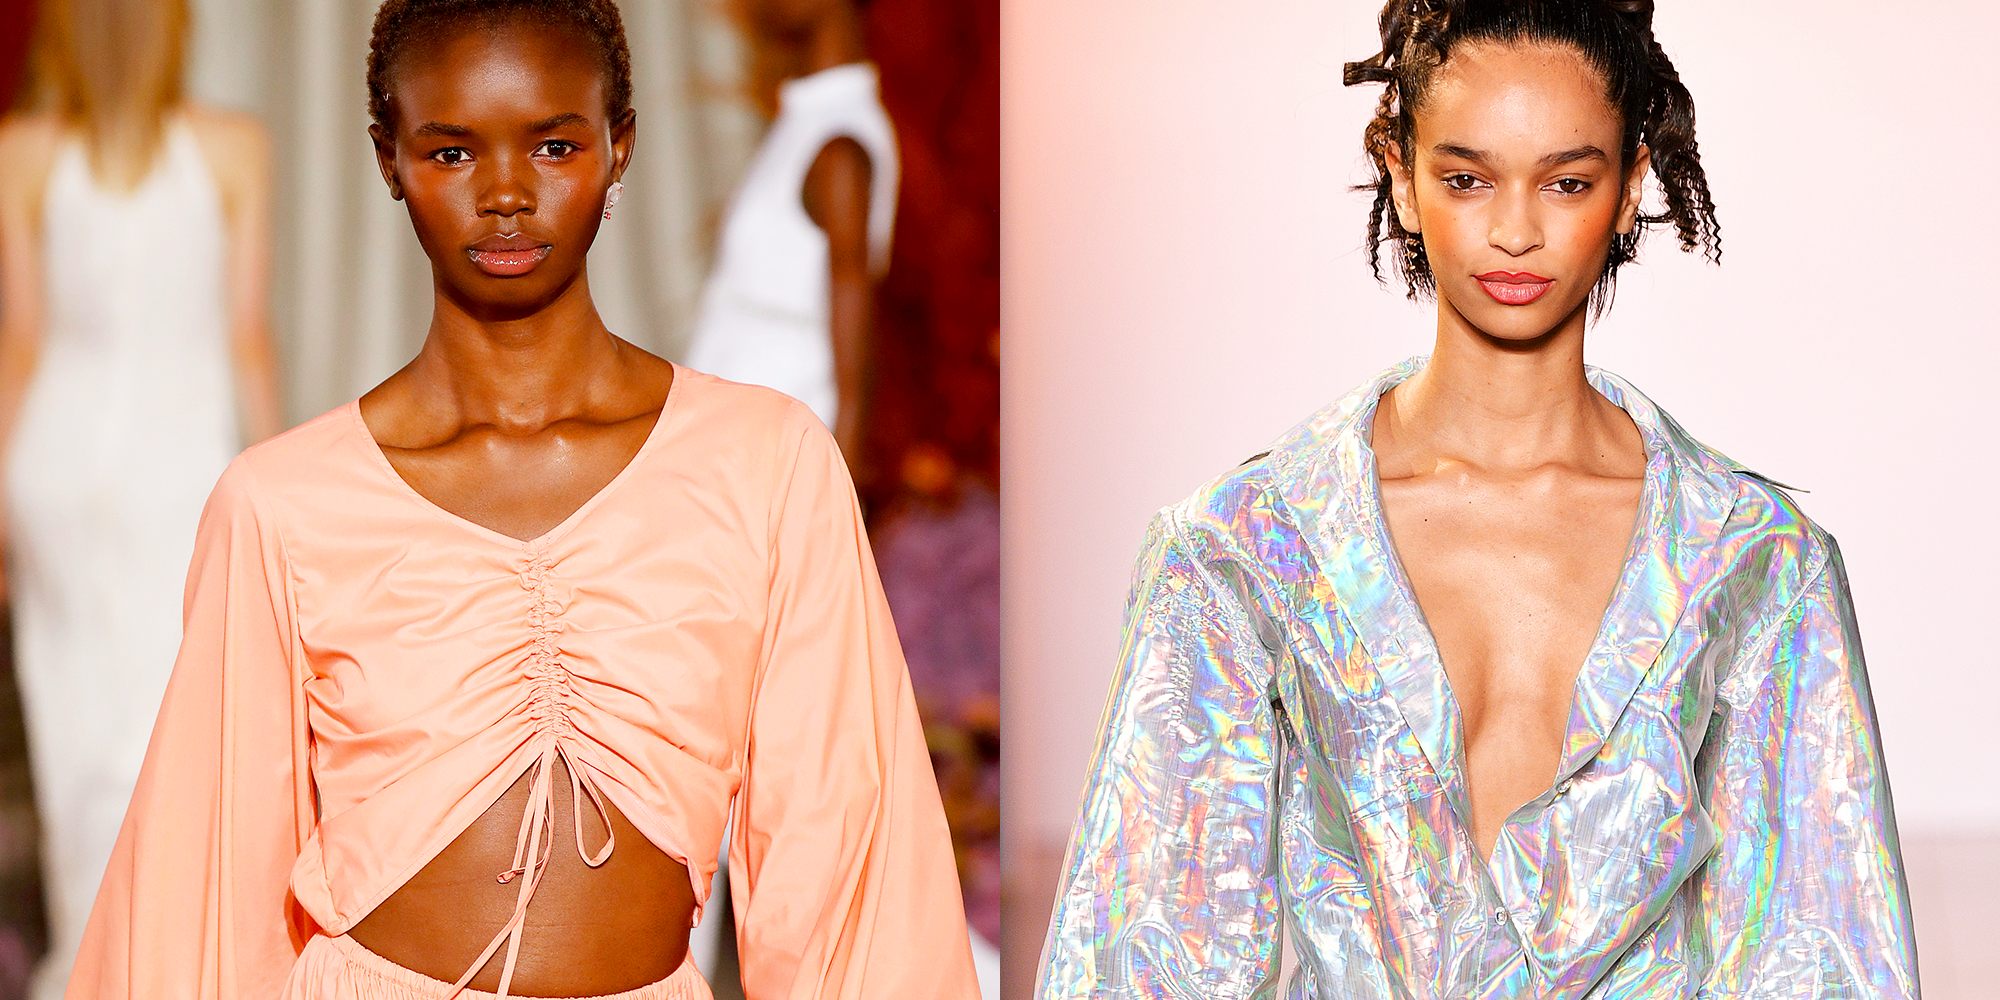 The 7 Biggest Spring 2020 Fashion Trends From the Runway